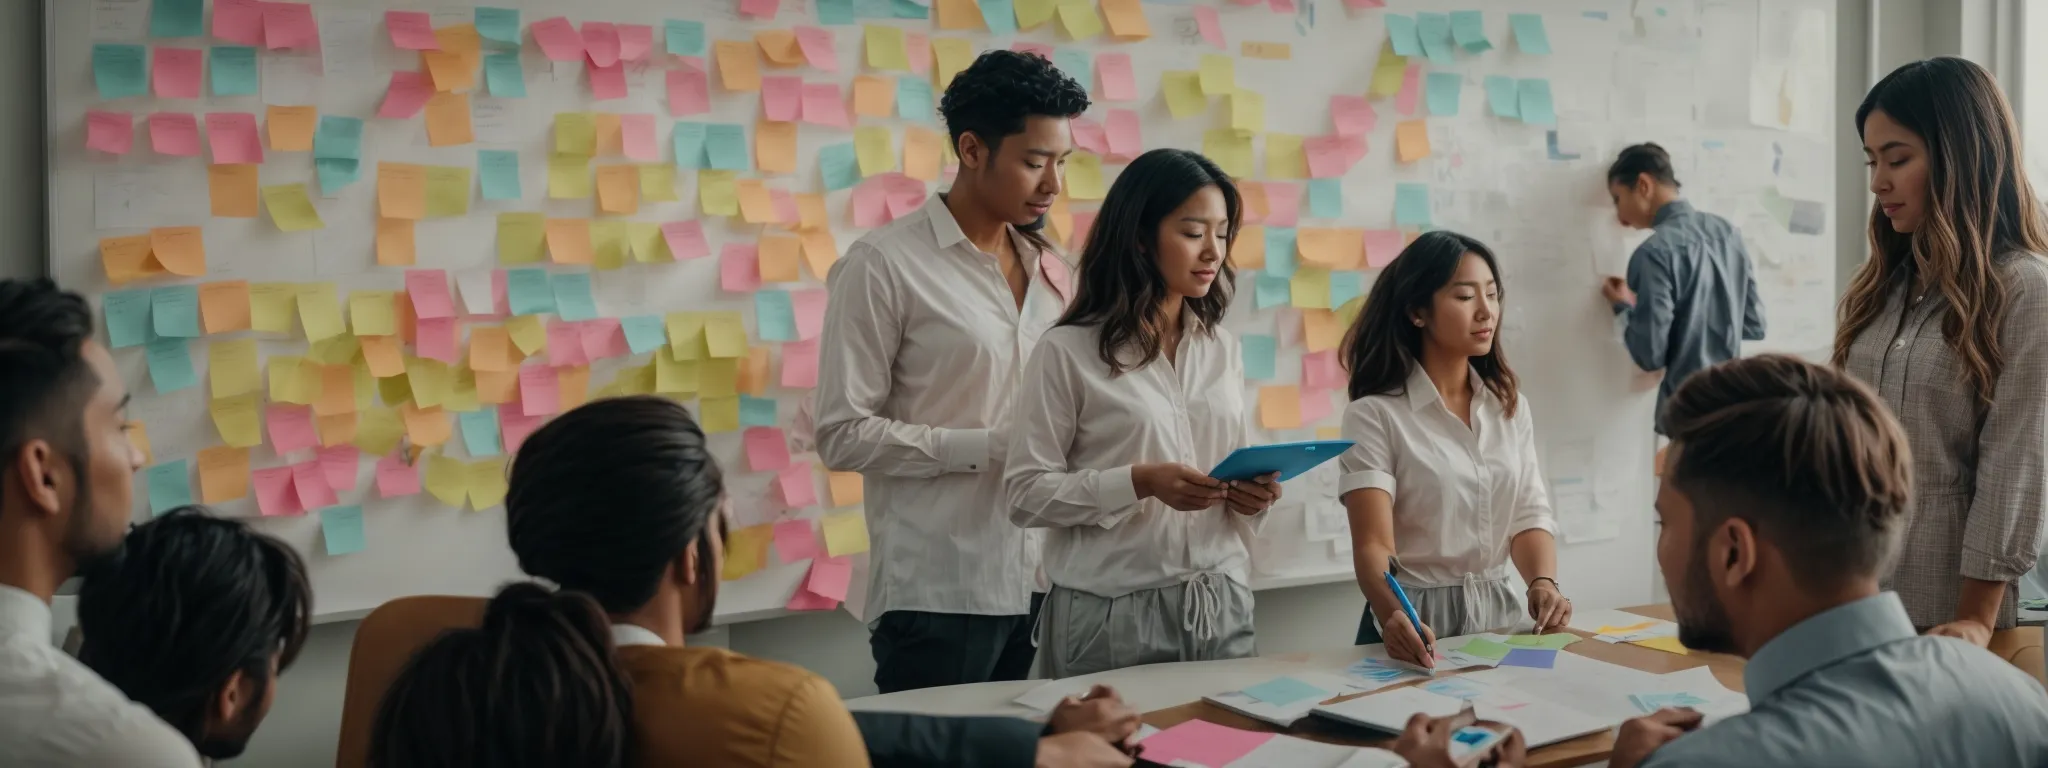 a team gathered around a whiteboard displays a colorful array of sticky notes and charts, denoting their collaborative effort in seo strategy planning.